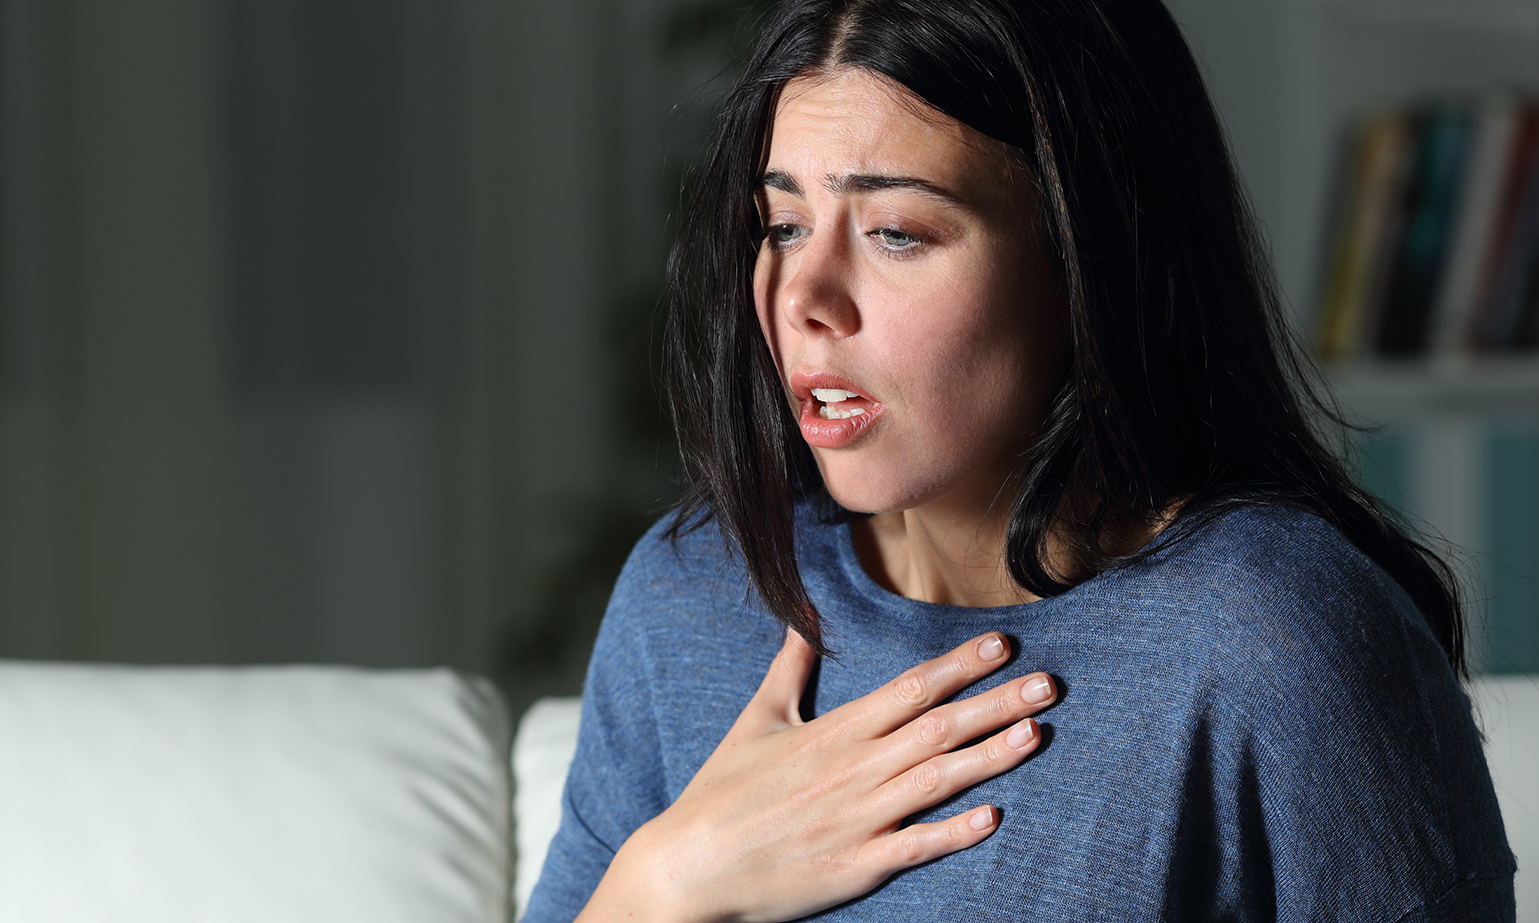 Can Anxiety Cause Heart Palpitations